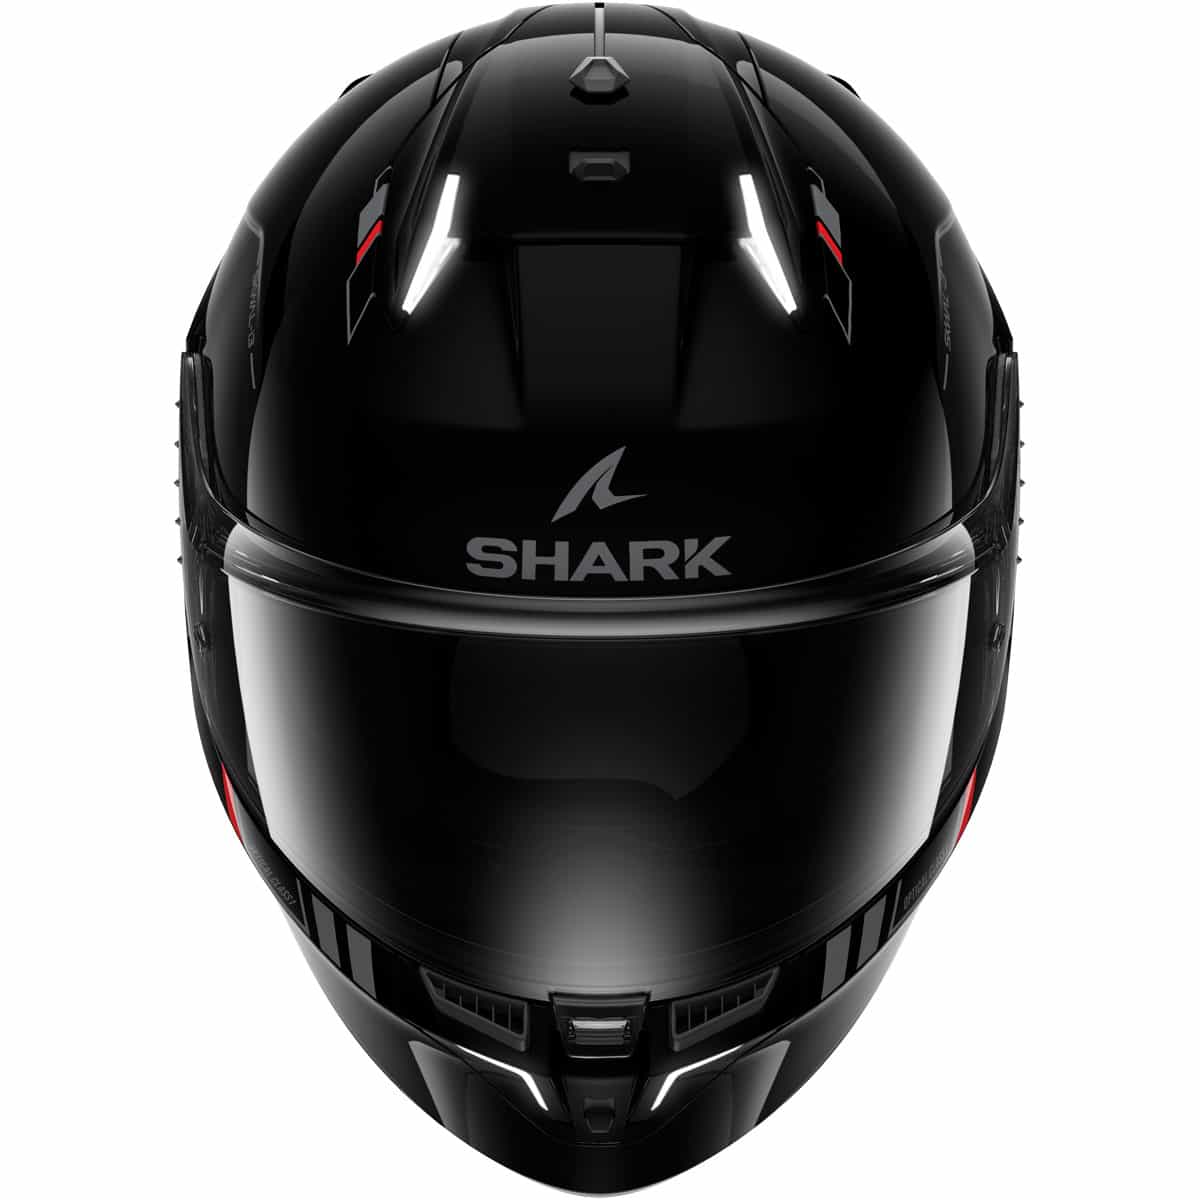 The Shark Skwal i3 helmet is the world's 1st helmet with integrated brake lights. This innovative full face helmet combines LED lights with an integrated accelerometer to trigger rear flashing brake lights on braking, without the need for cables or Bluetooth! 2